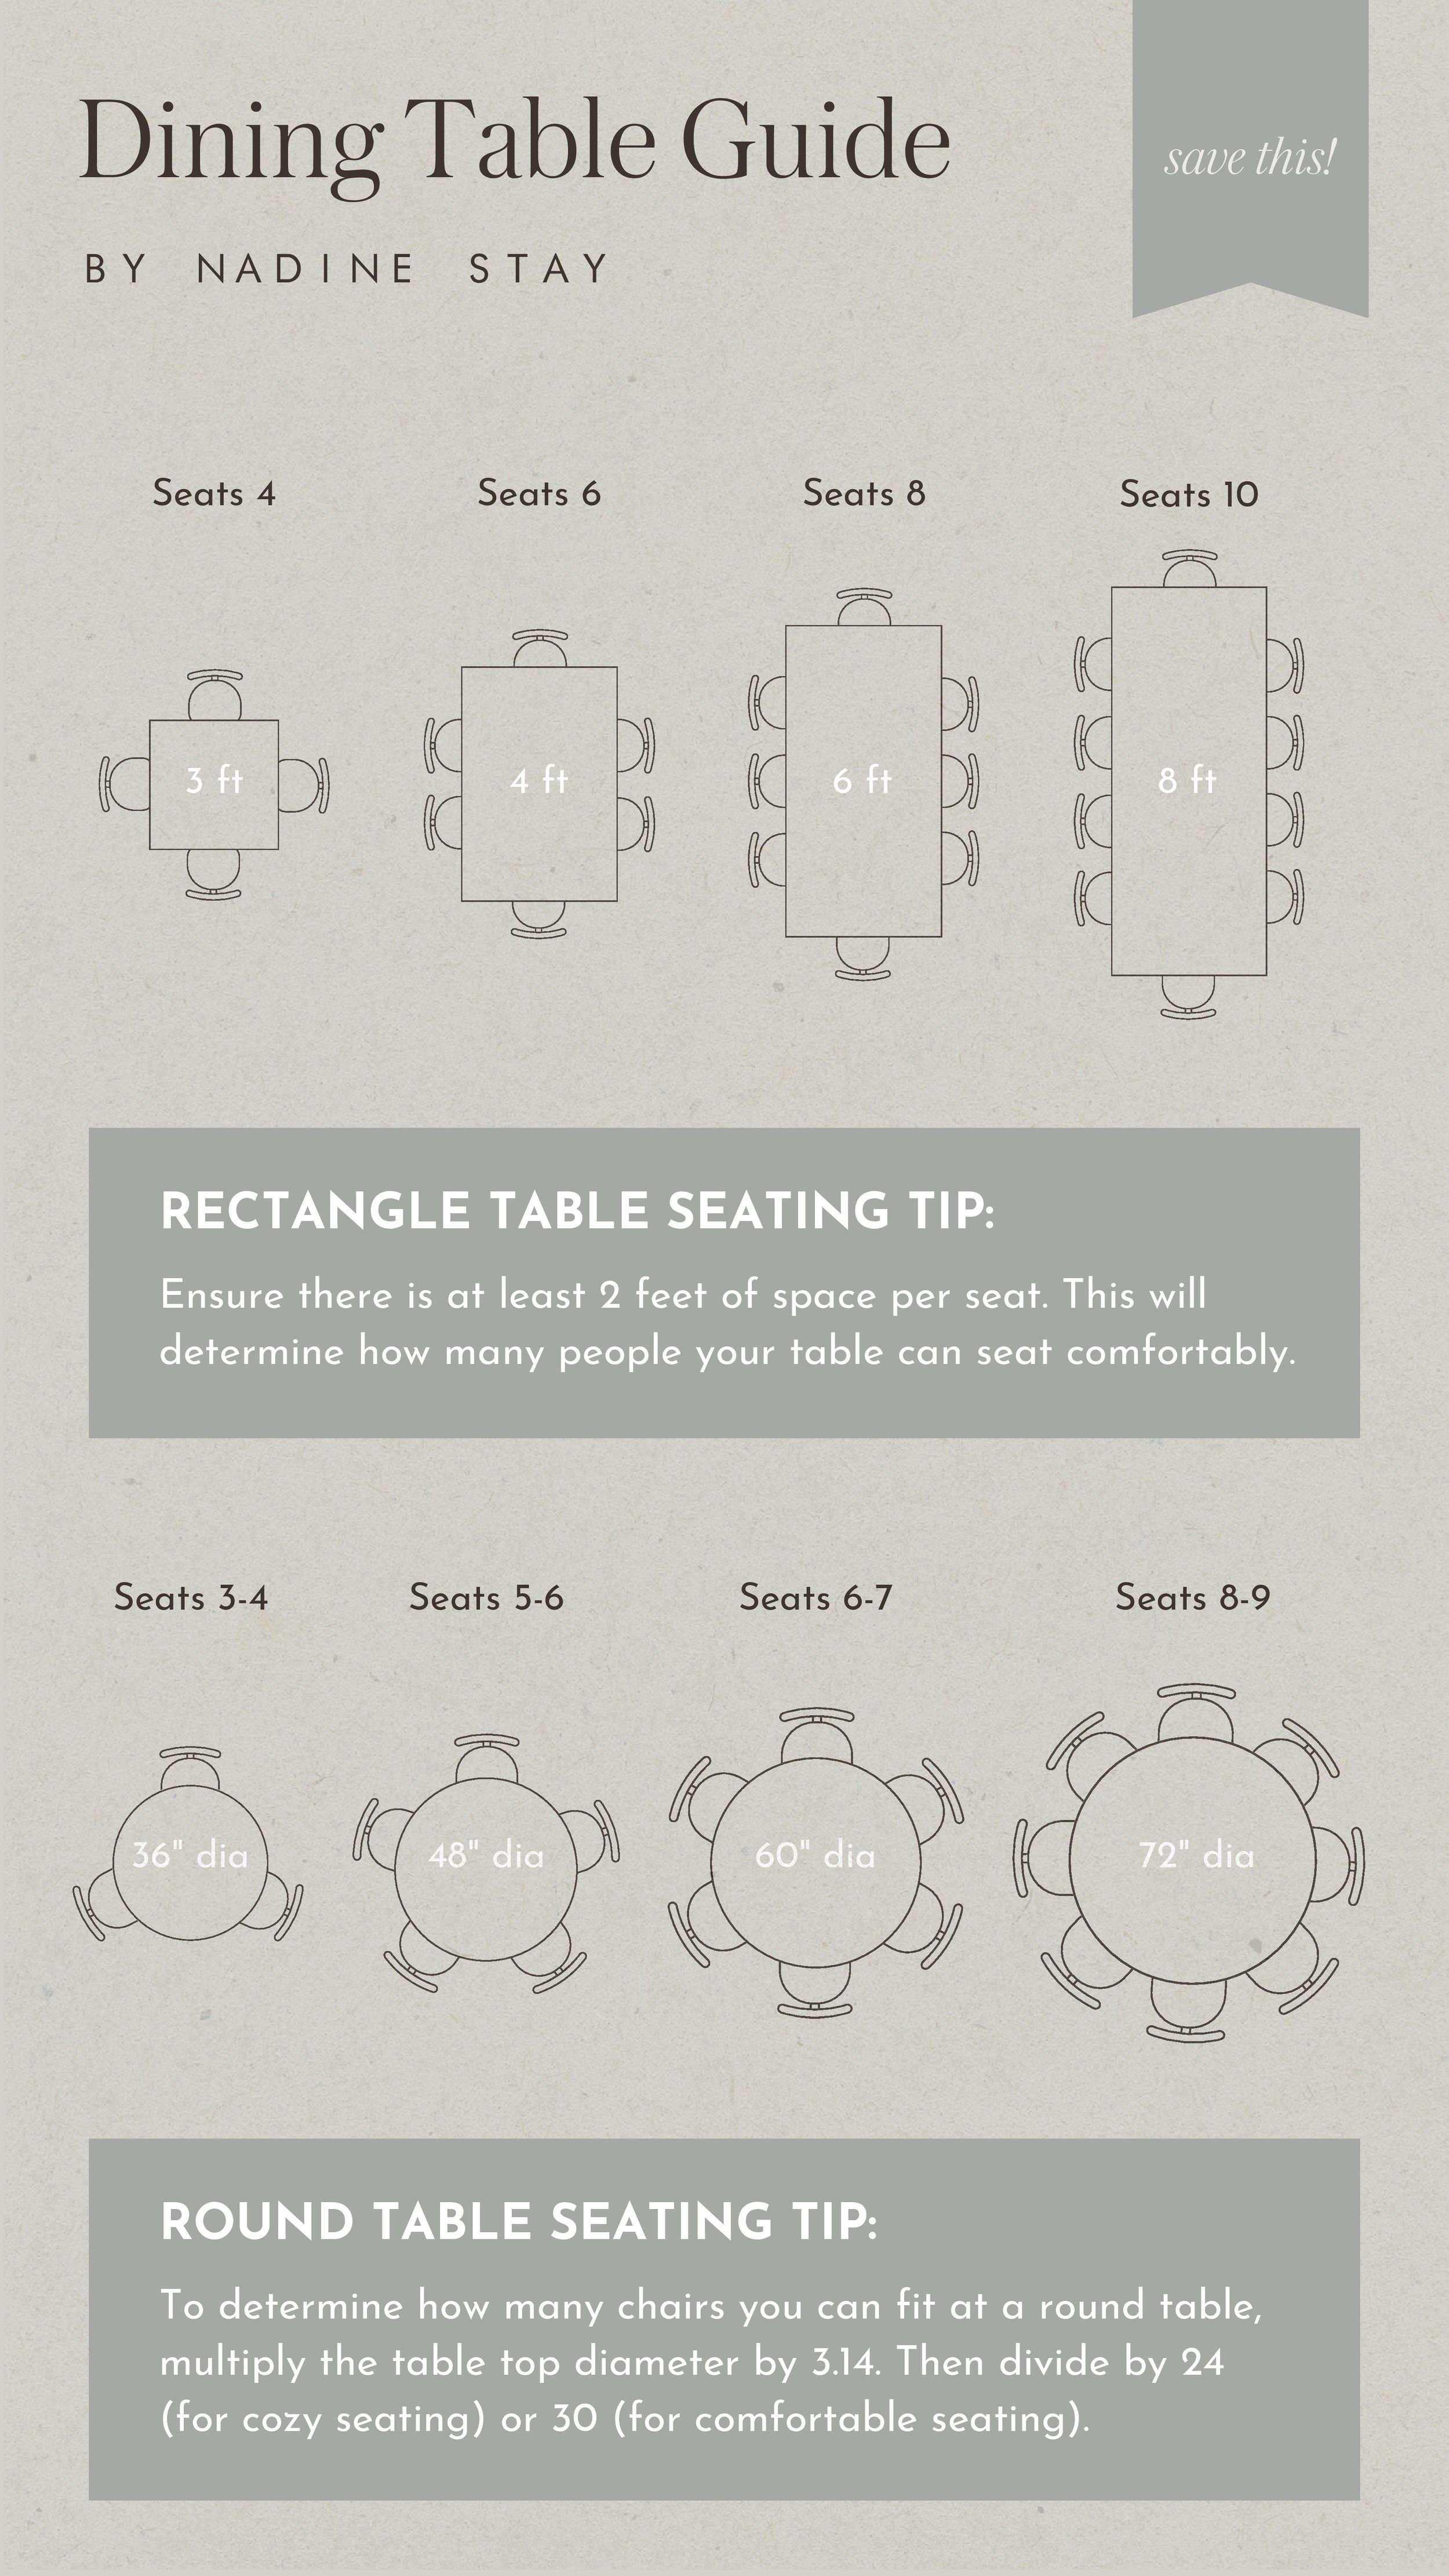 Dining Table Size, Shape, And Seating Guide by Nadine Stay | How to determine what size dining table will fit in your home. How to determine how many chairs fit at a rectangle and round dining table. Dining table shape guidelines.